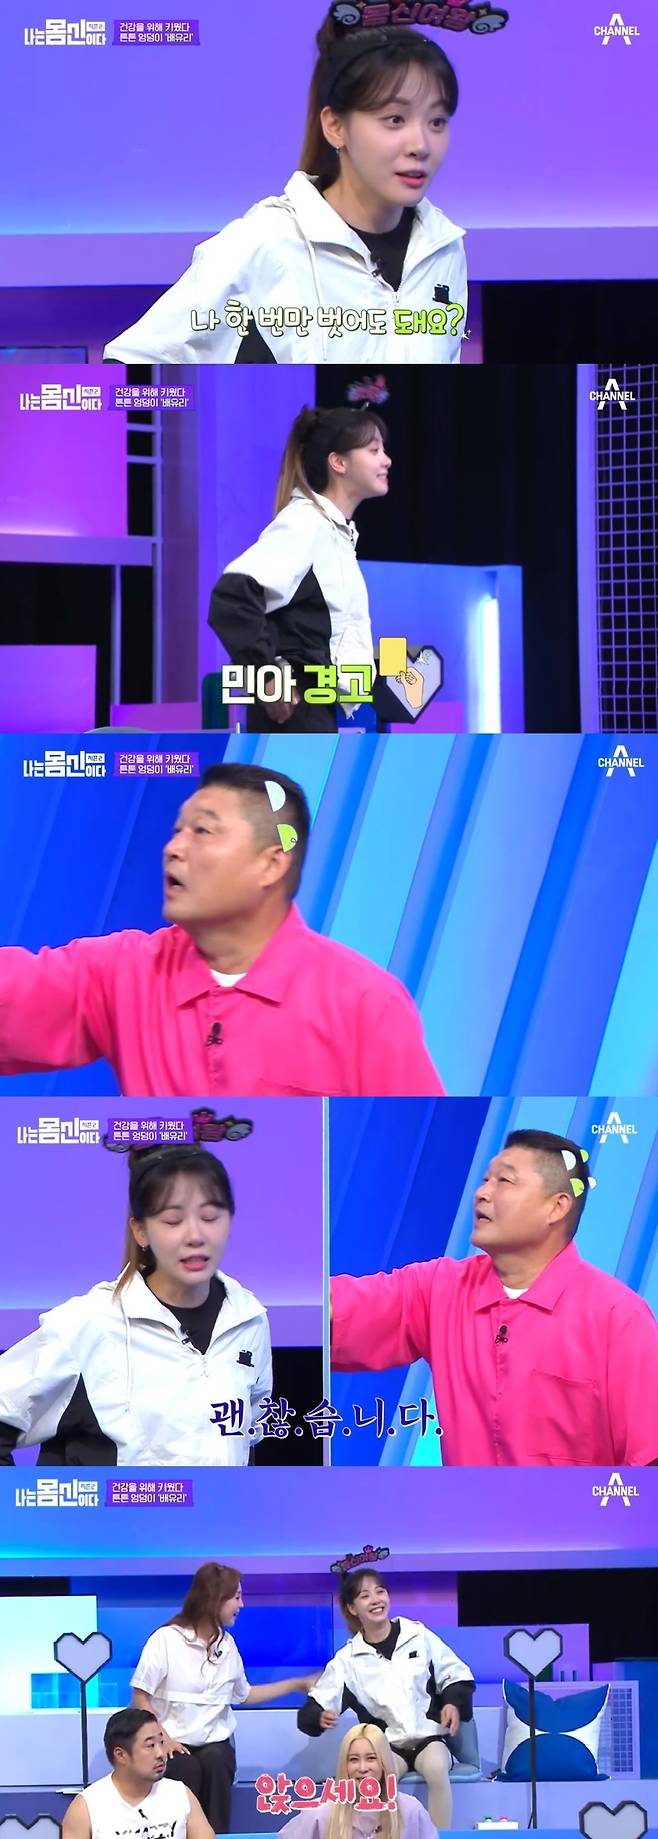 Kim Min-ah embarrassed Kang Ho-dong.Channel A, which was broadcast on June 29, was a special lecture to make apple heap in I am Body God Season 2.On this day, Kim Min-ah admired the body of 22-year-old apple heap designer Kwon Yuri, who was a hip-exercise expert who designed a body-tailored hip design that attracted everyones attention.Kim Min-ah insisted, Do not you have to ride a hip flesh? Apple heap is not hereditary. Can I take it off once?I am leggings, too, he said, trying to show his dry hip, making Kang Ho-dong embarrassed.Kang Ho-dong said, Its okay, adding to the laughter. Ayumi eventually pulled Kim Min-ah and said, Sit down.On the other hand, Kwon Yuri said, I had a past when I was called a hipless child, but I also fell down because I was weak. It is an apple heap made purely by exercise.